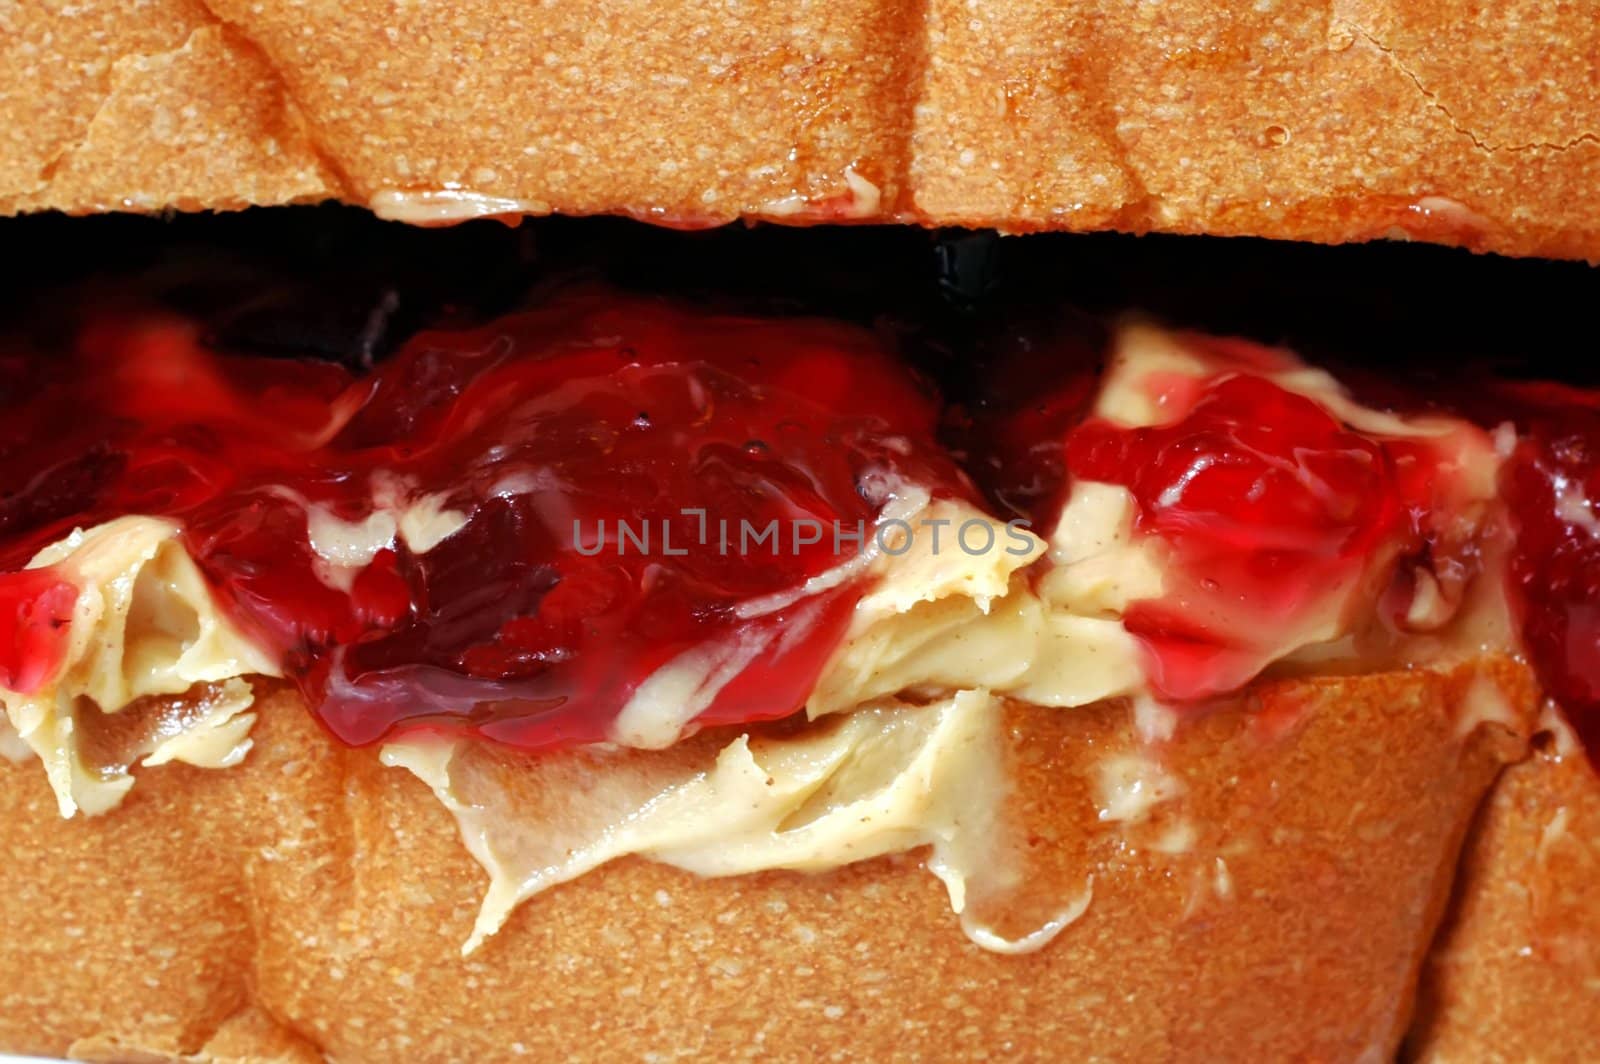 Closeup of peanut butter and jelly sandwich.